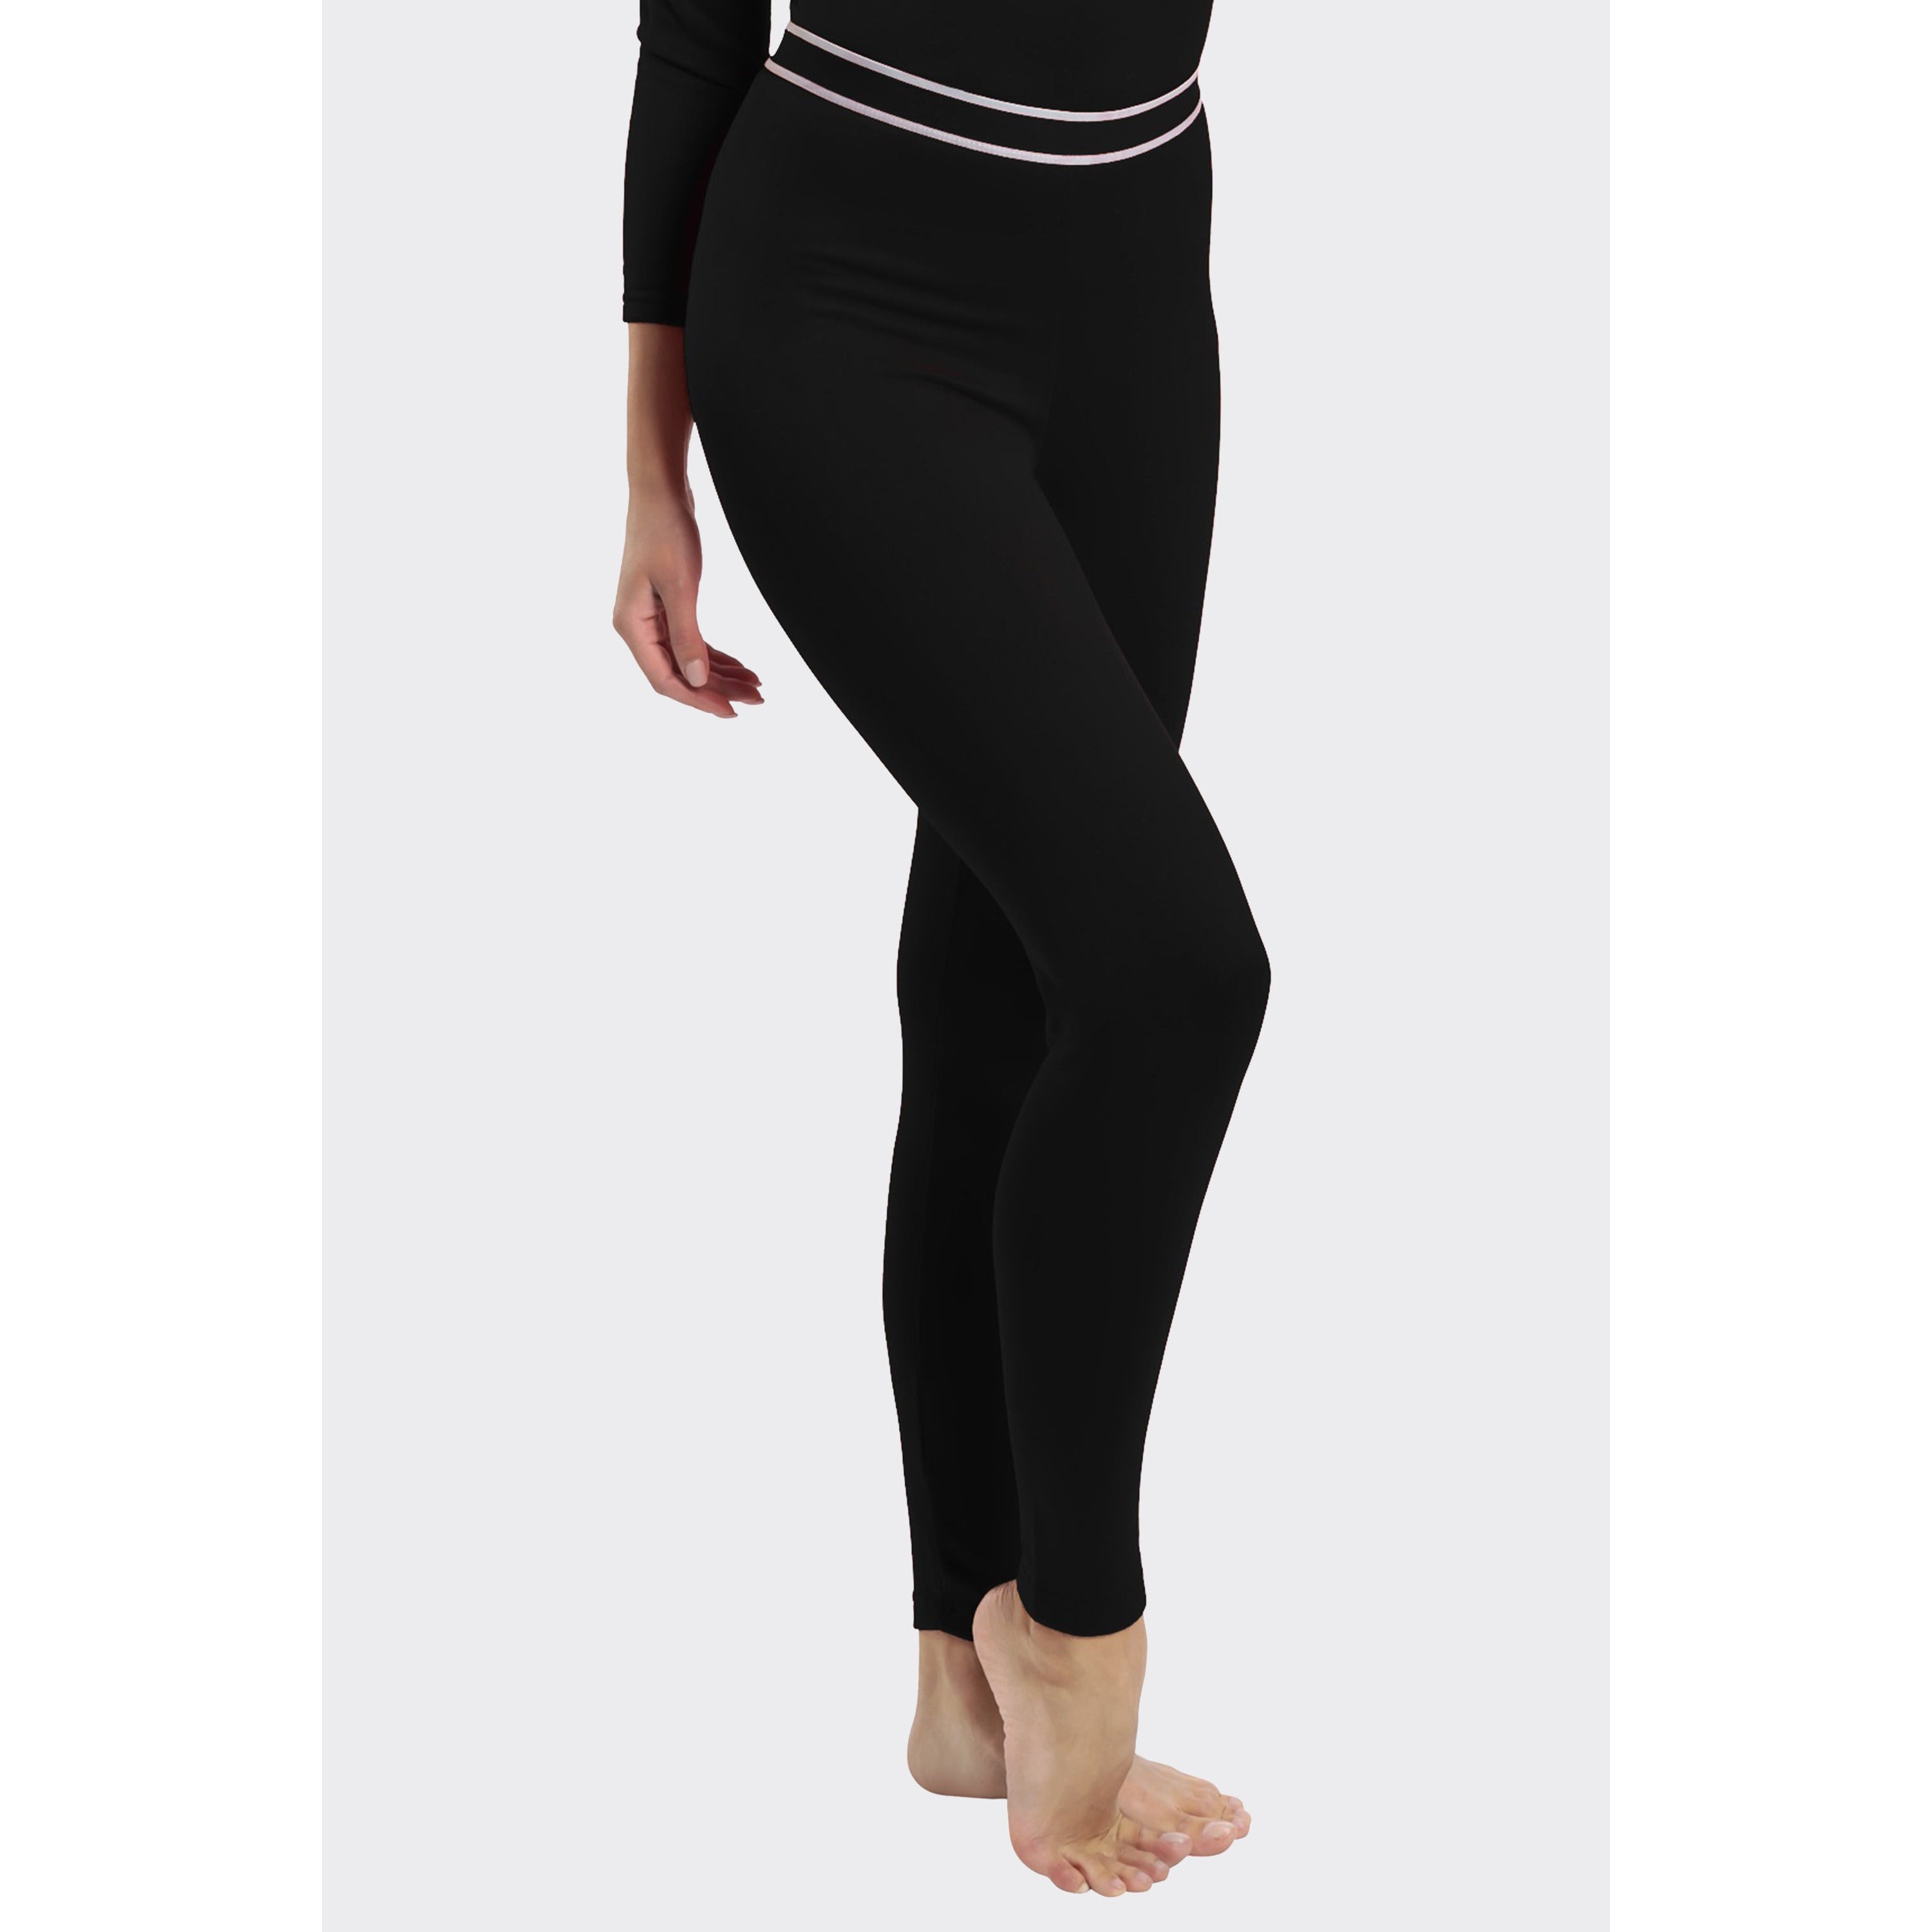 Rocky Thermal Underwear For Women (Long Johns Thermals Set) - Import It All